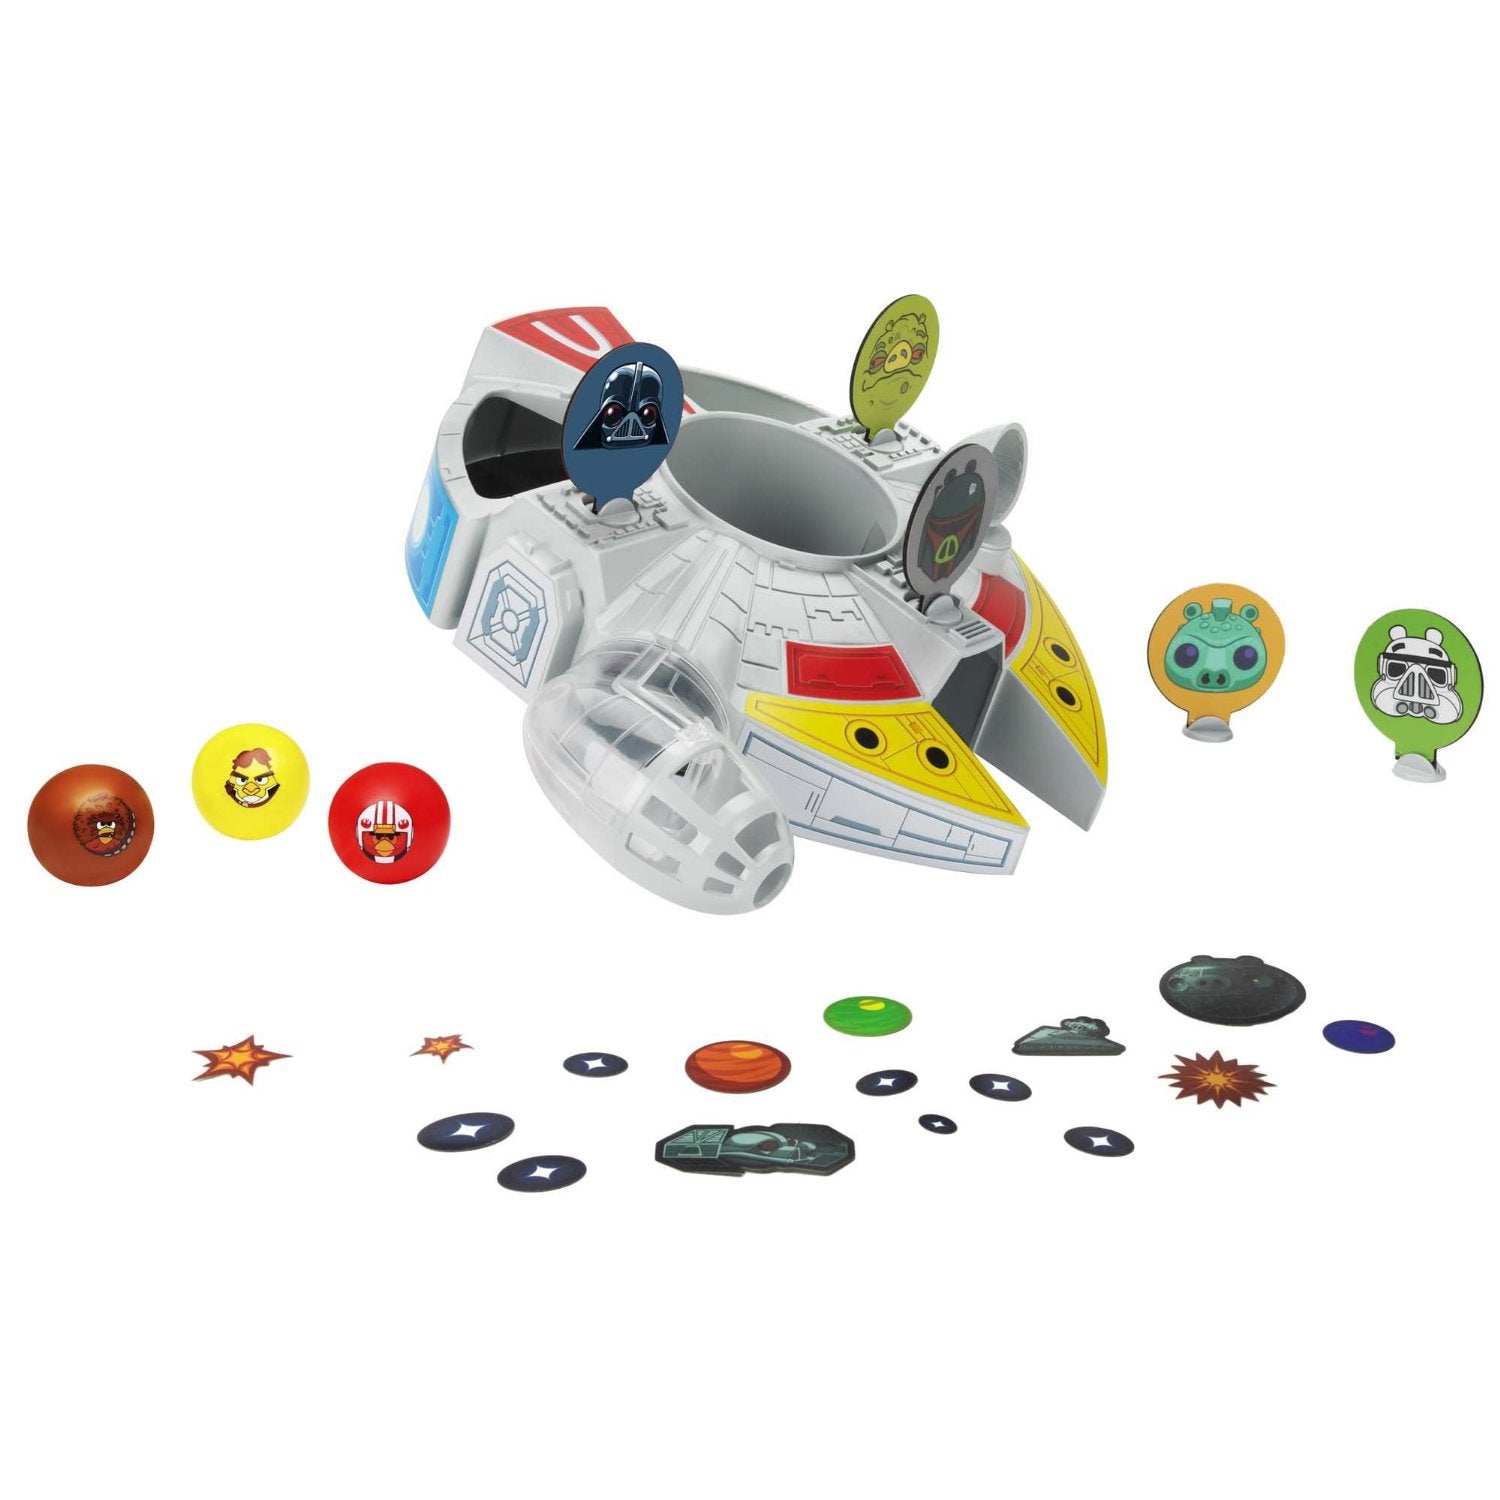 Angry Birds Toys - Star Wars Millennium Falcon Bounce Game